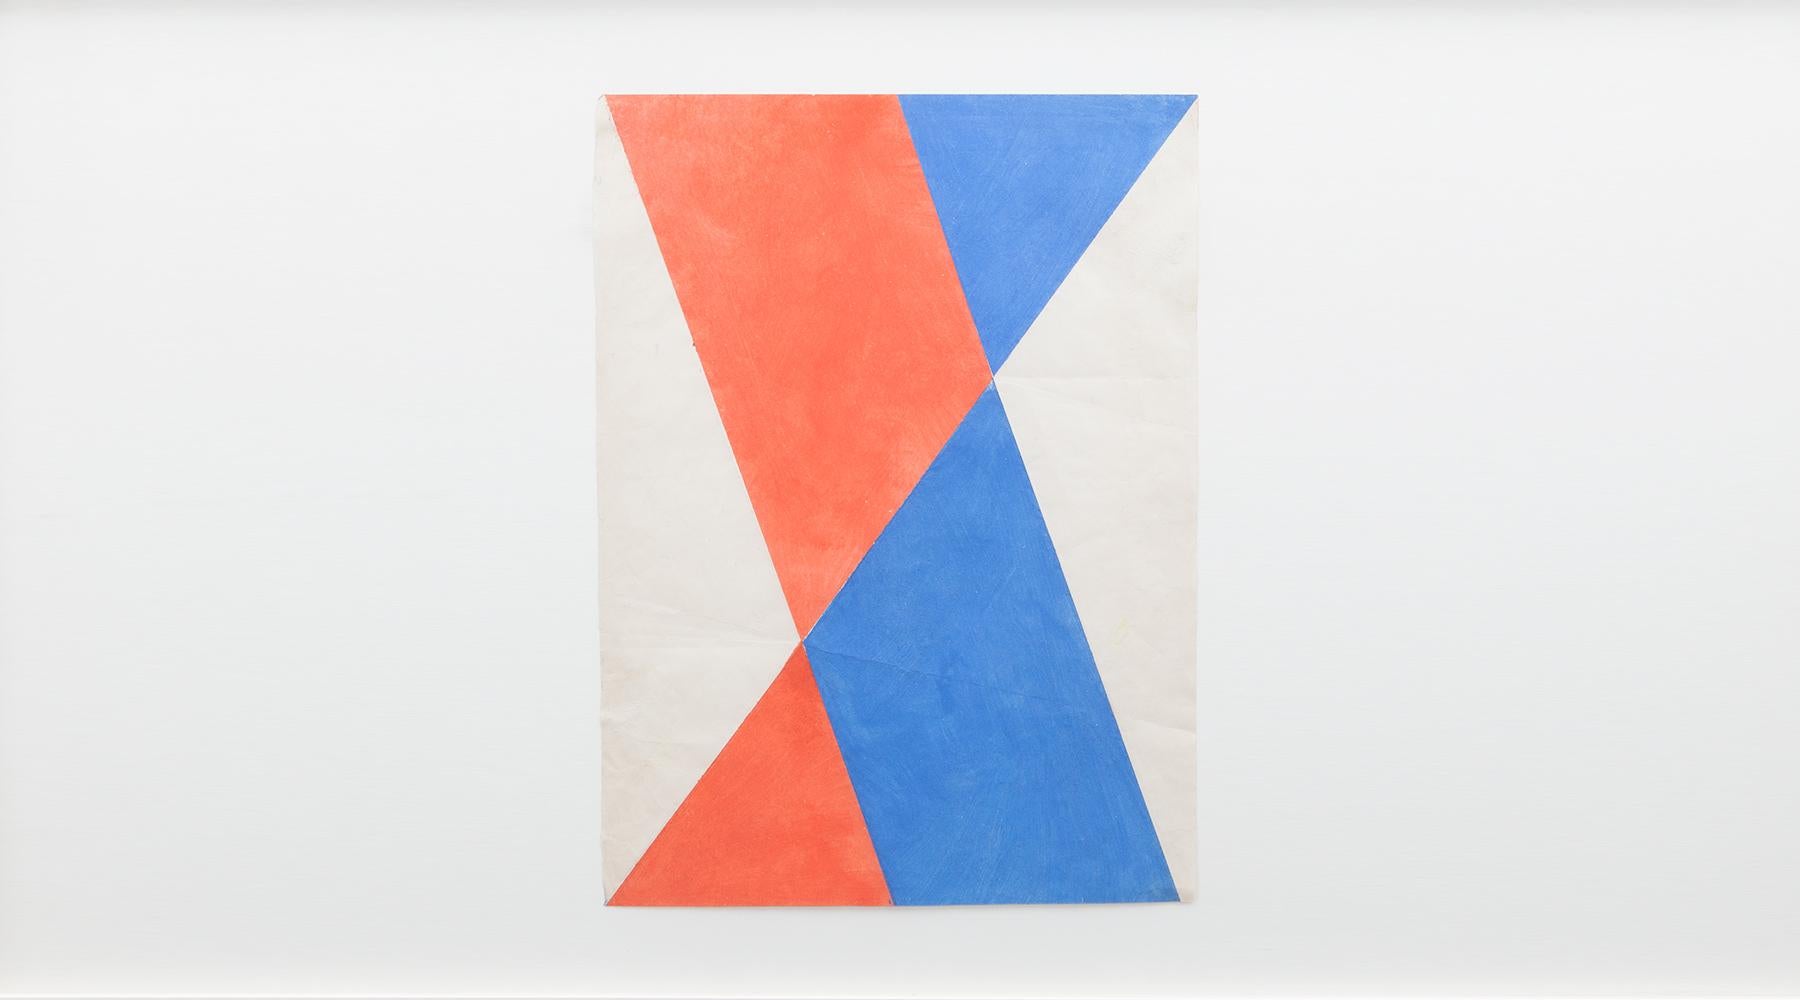 Folding, red and blue, Hermann Glöckner, Germany, 1974.

Folding is the determining principle in the artistic work of Hermann Glöckner. This example comes in red and blue in a white wooden frame. The size of the frame is h 76.5 / w 60.5 cm. The work